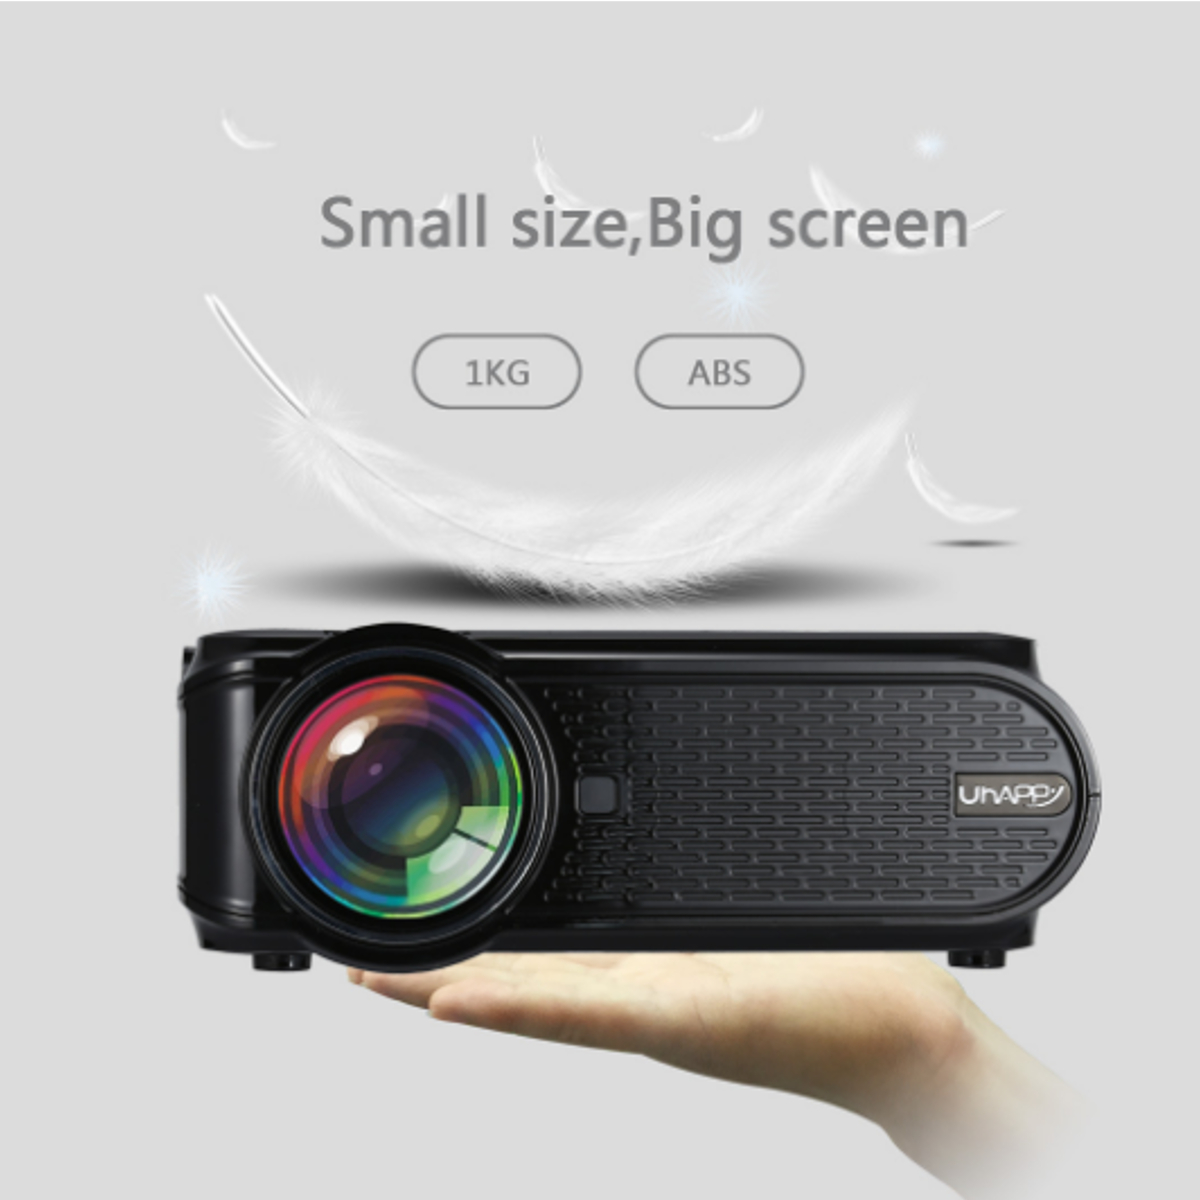 UHAPPY U90 Black Android 6.0 2000 Lumens LED WiFi bluetooth 4.0 Projector 800 x 480 Support 1080p 22